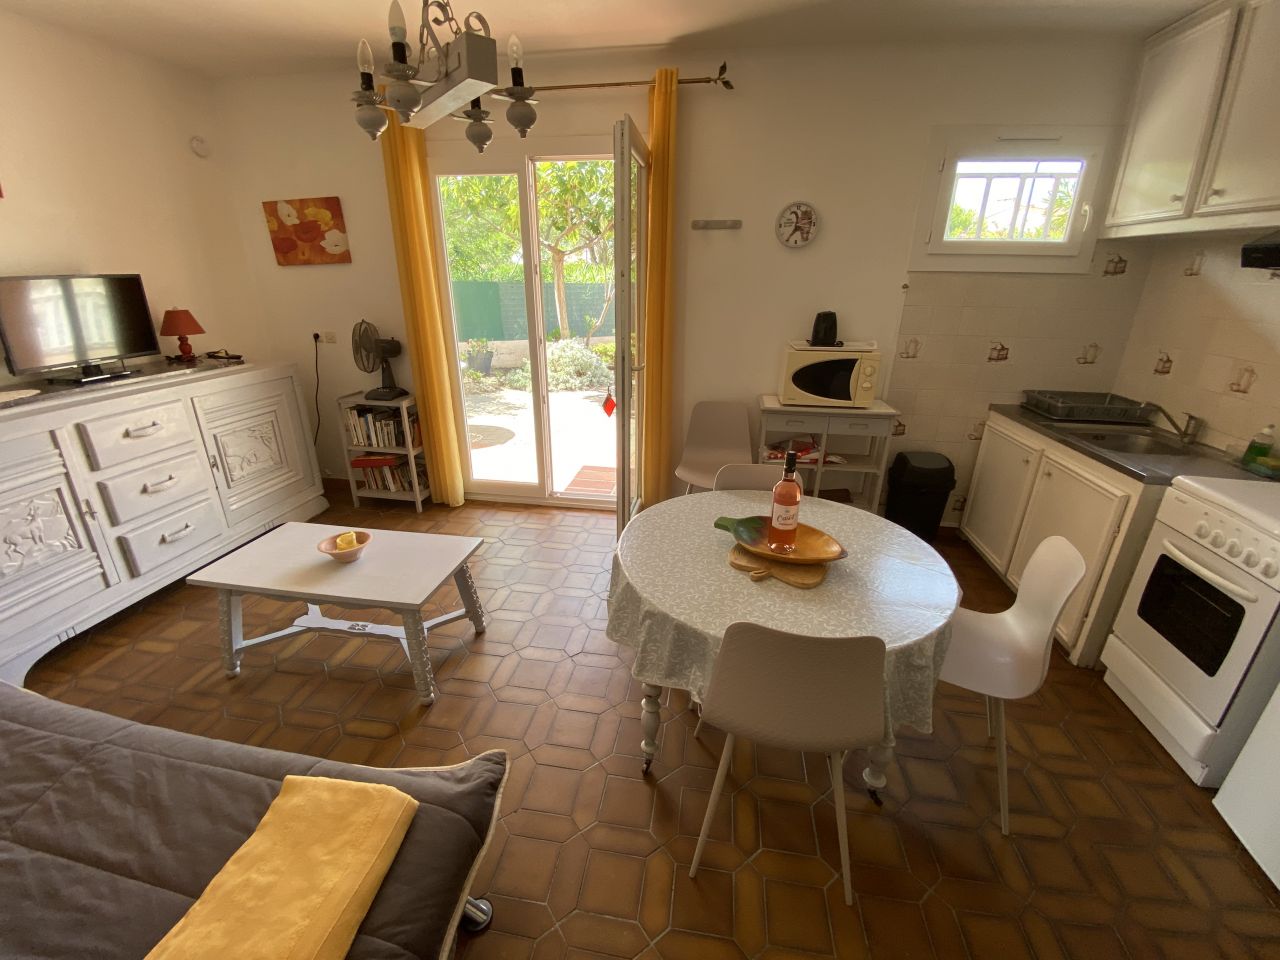 Location appartement Le Baracrs N°8304 image 3